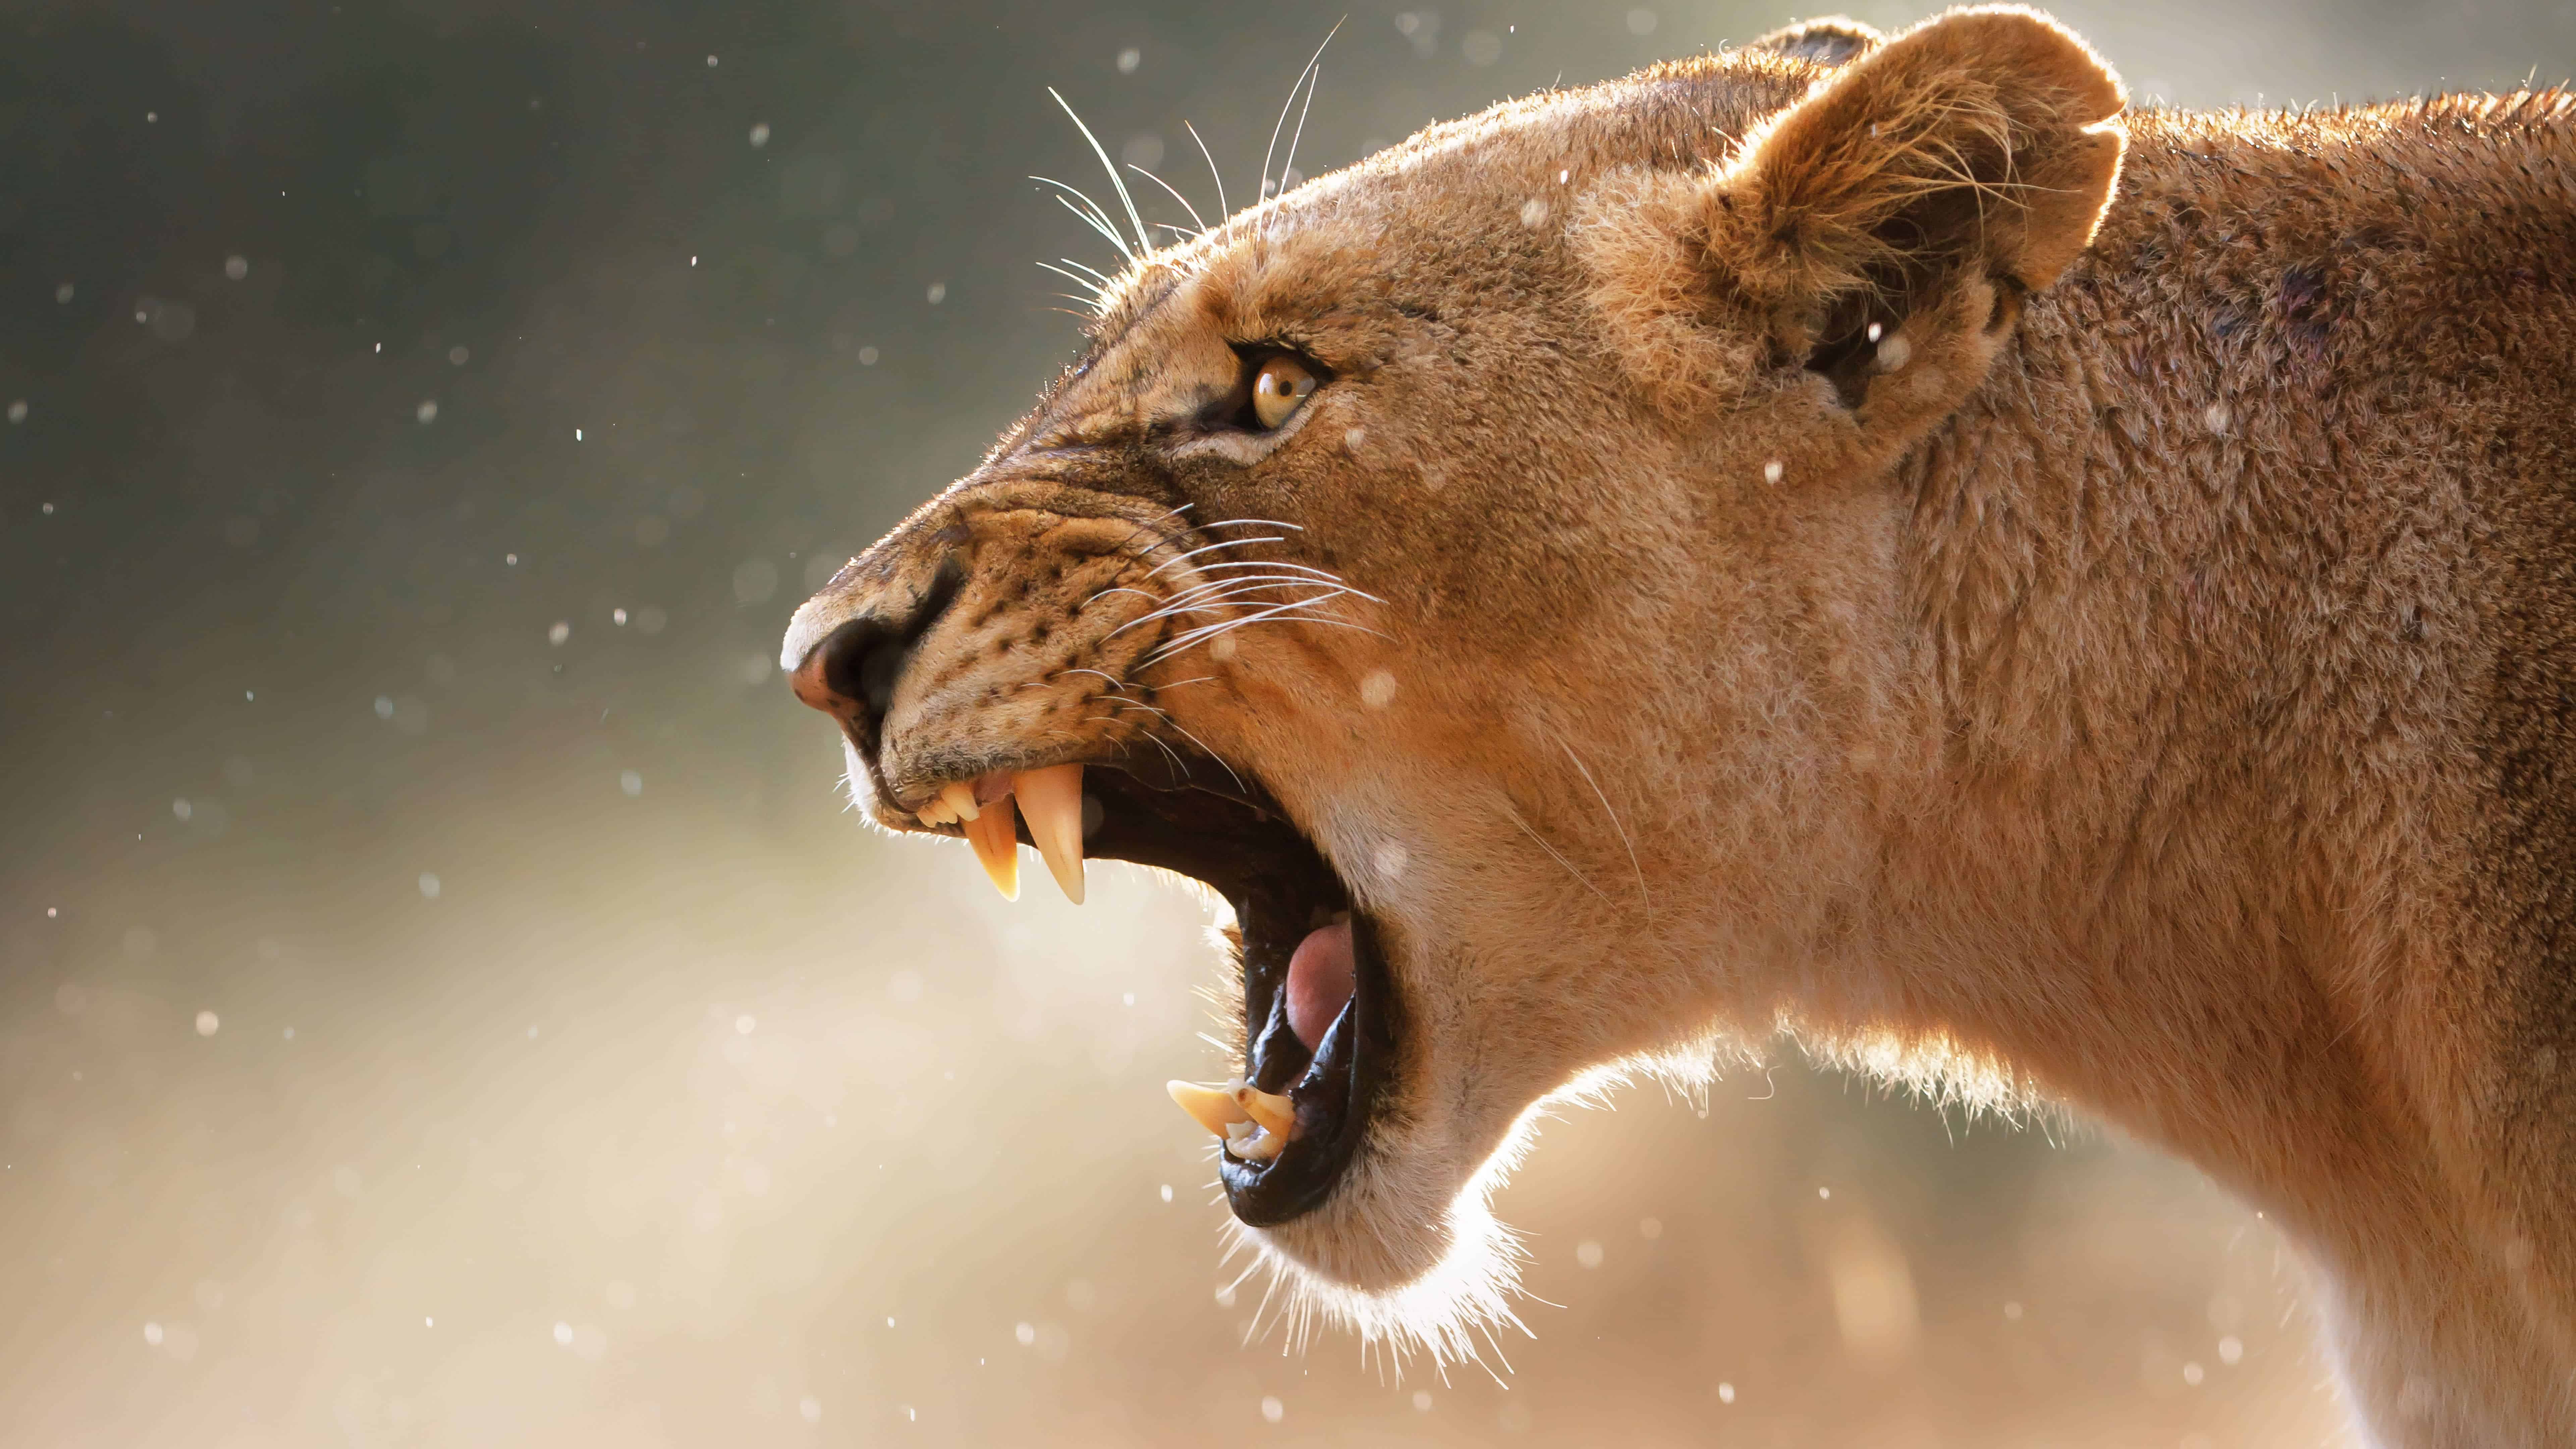 Angry Female Lion Uhd 8k Wallpaper - Mother's Love Is Unconditional Her Temper - HD Wallpaper 